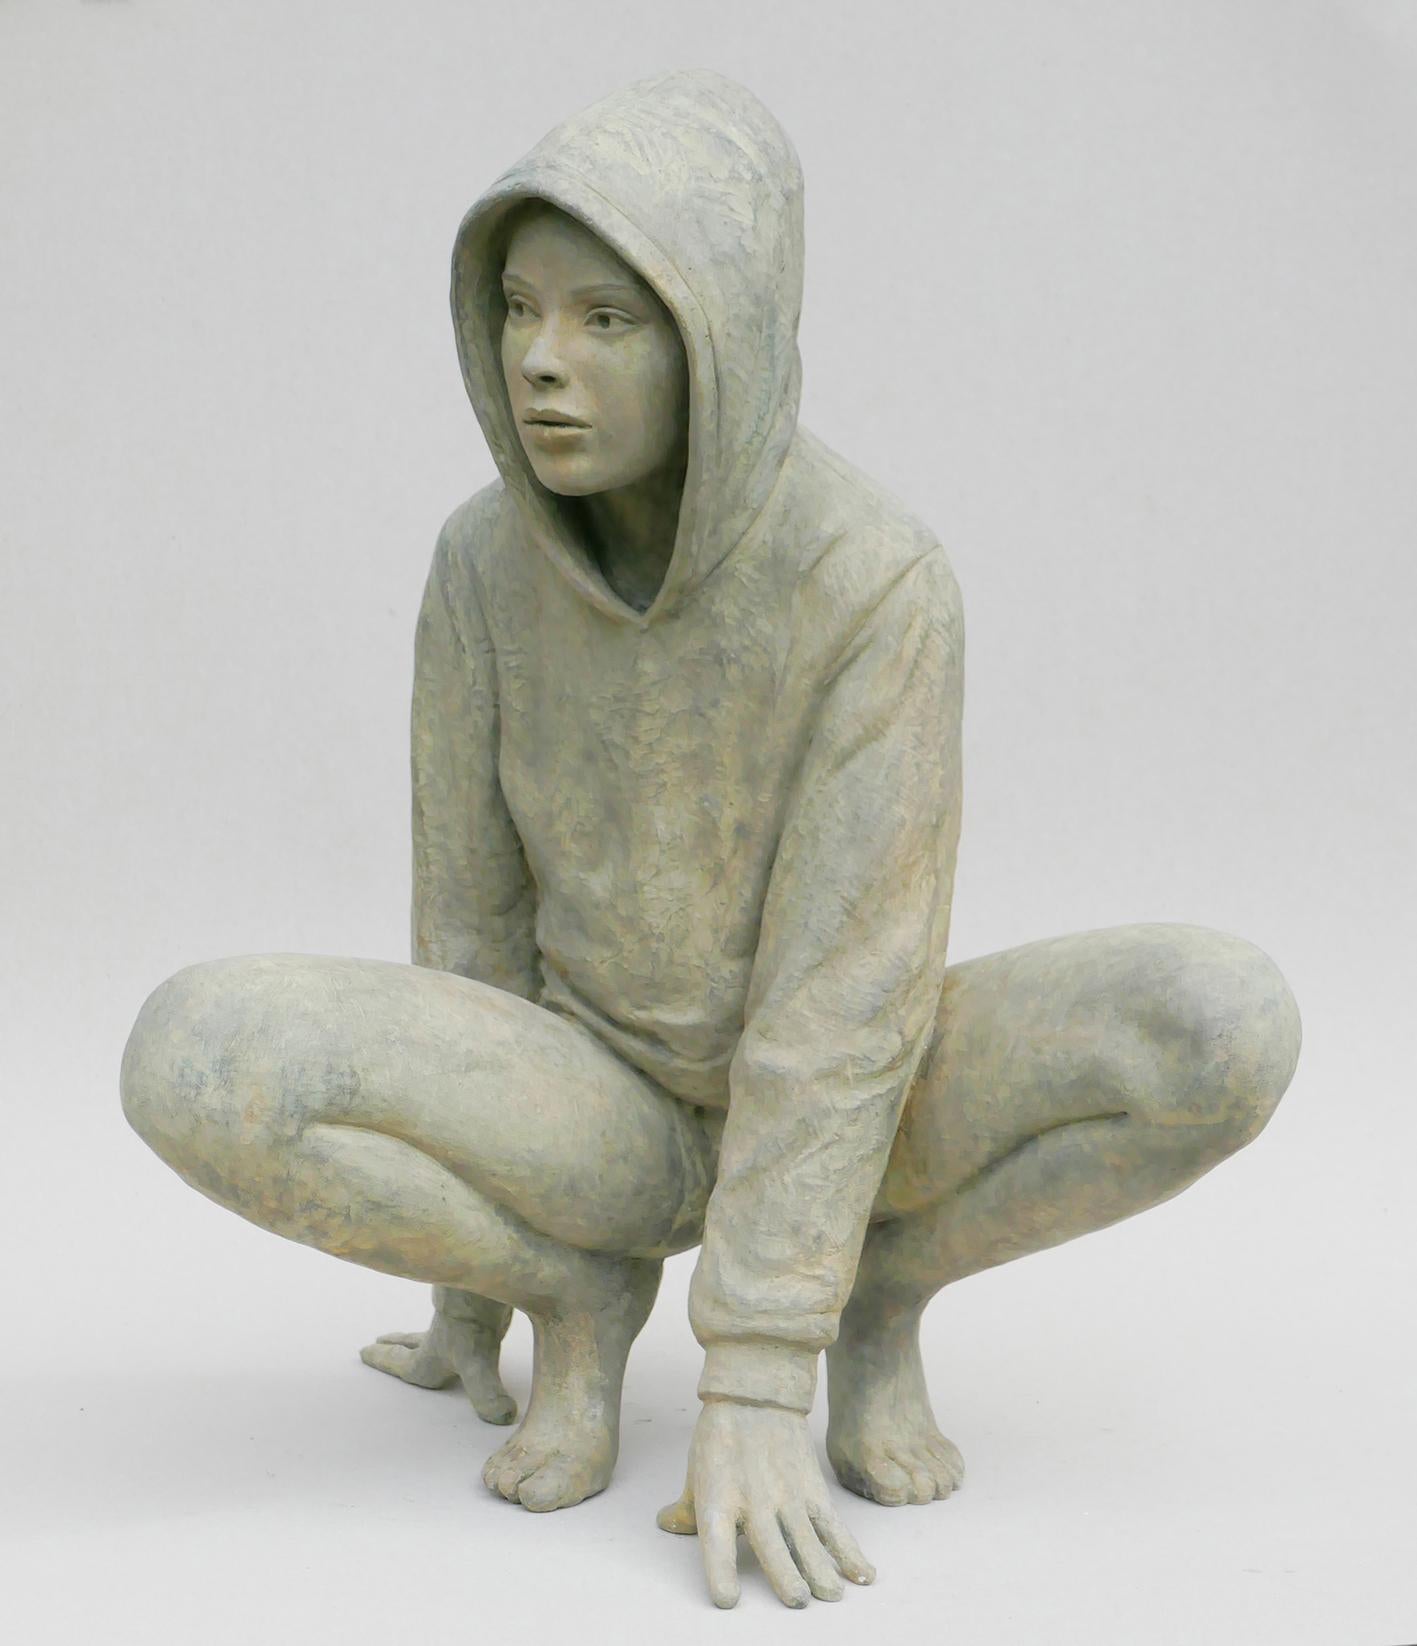 Hoodie II Young Girl Modern Contemporary Bronze Sculpture In Stock Limited Edition

The statues of Erwin Meijer are subtle with a recognizable, personal handwriting.
They breathe the atmosphere of a narrative poem, where the reader not only